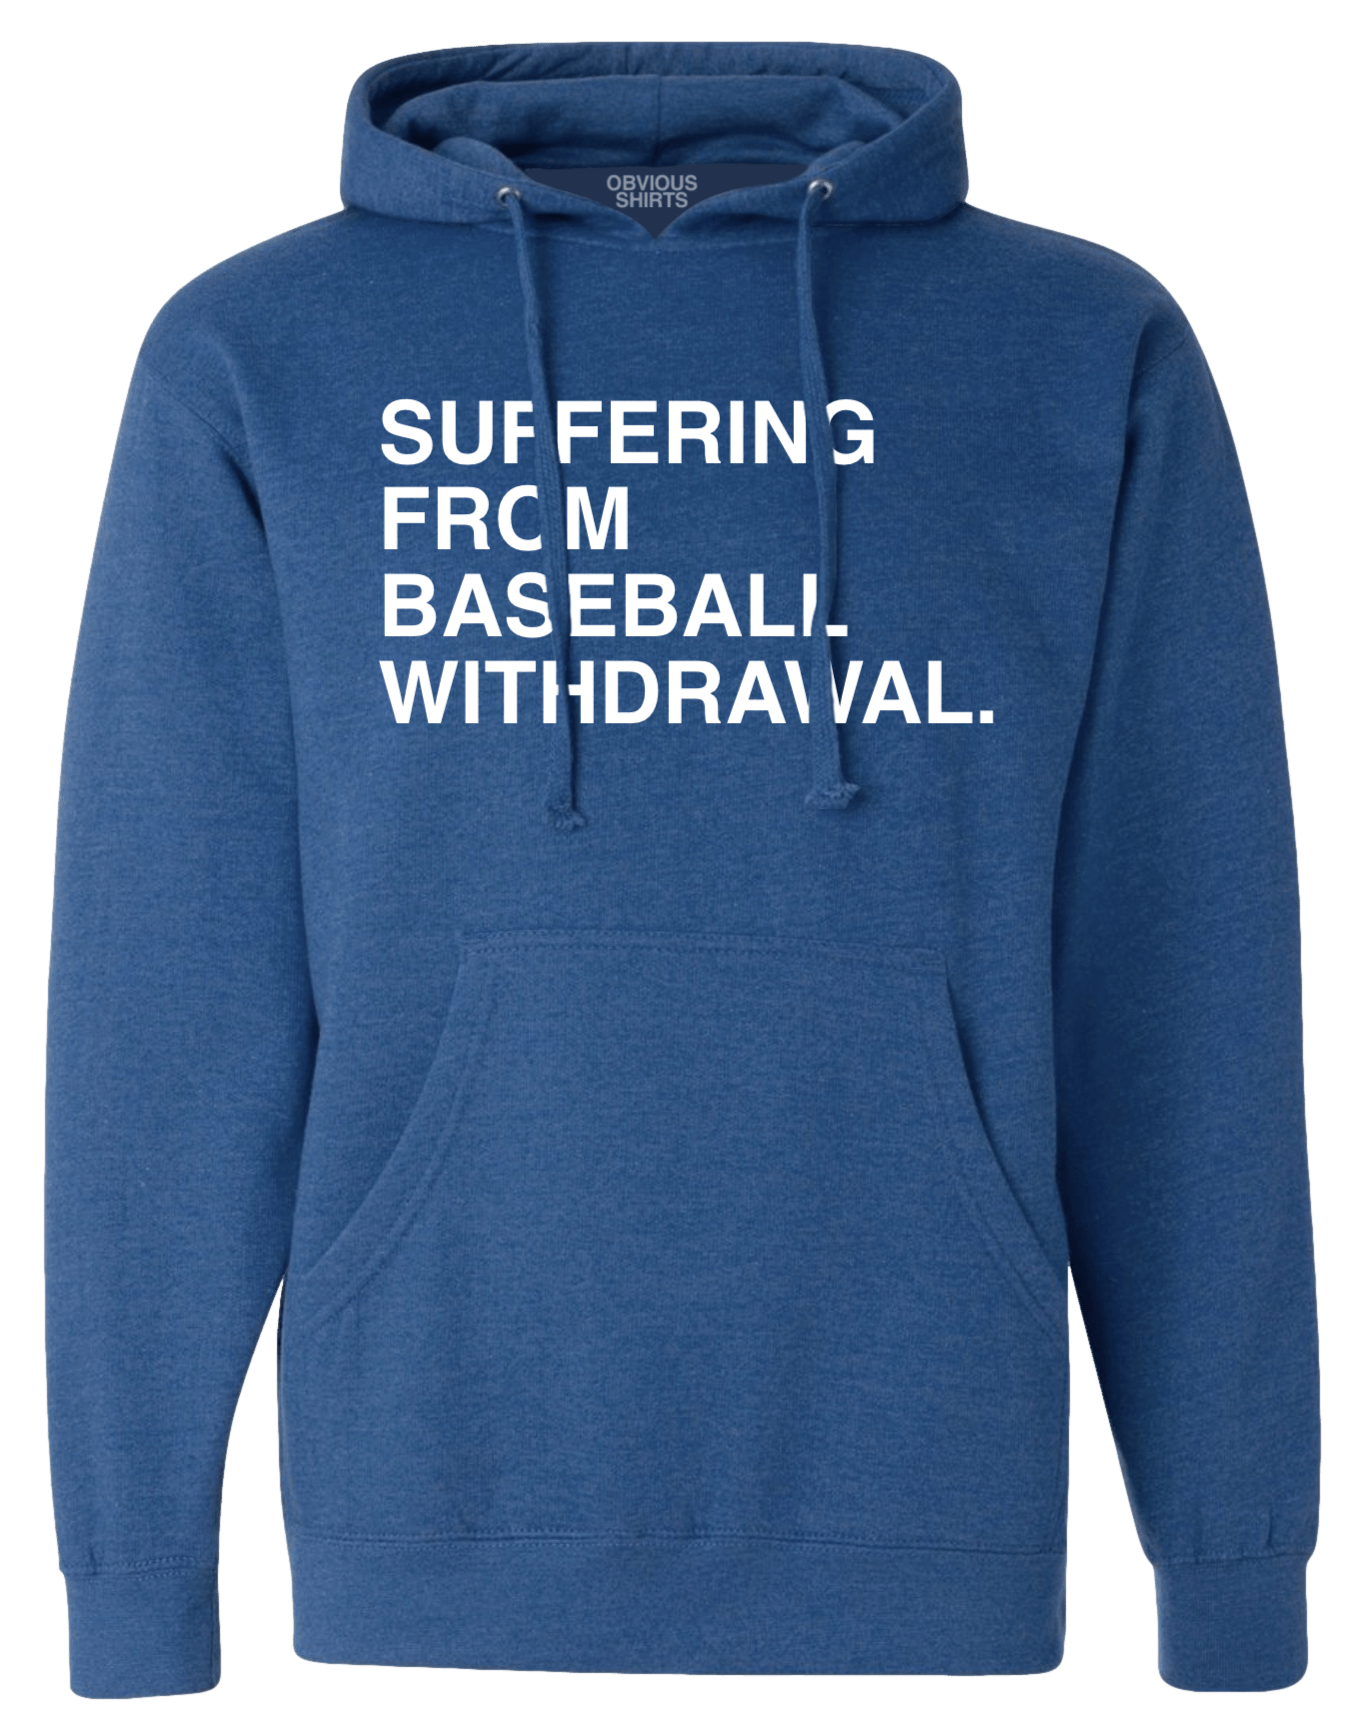 SUFFERING FROM BASEBALL WITHDRAWAL. (HOODED SWEATSHIRT) | OBVIOUS SHIRTS.